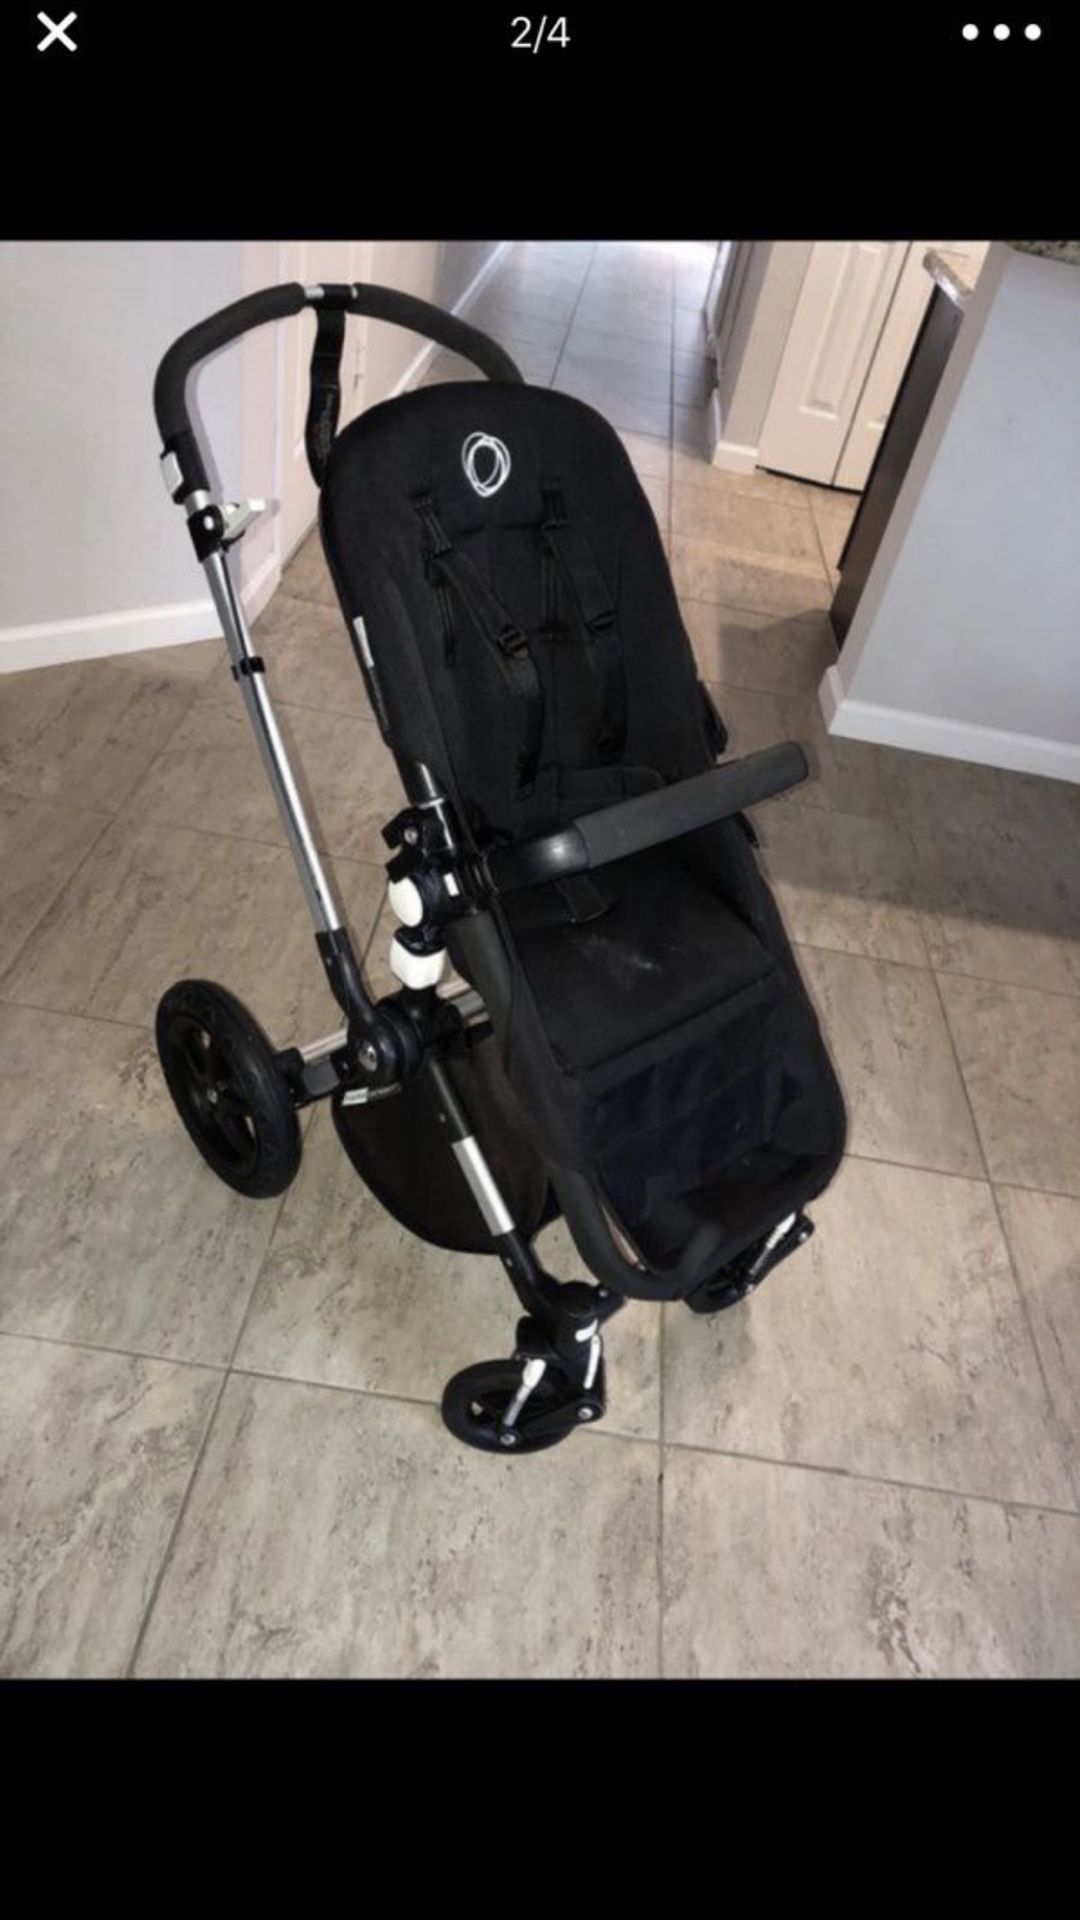 Bugaboo cameleon 3 I have pink covers and baby blue no sun canopy included